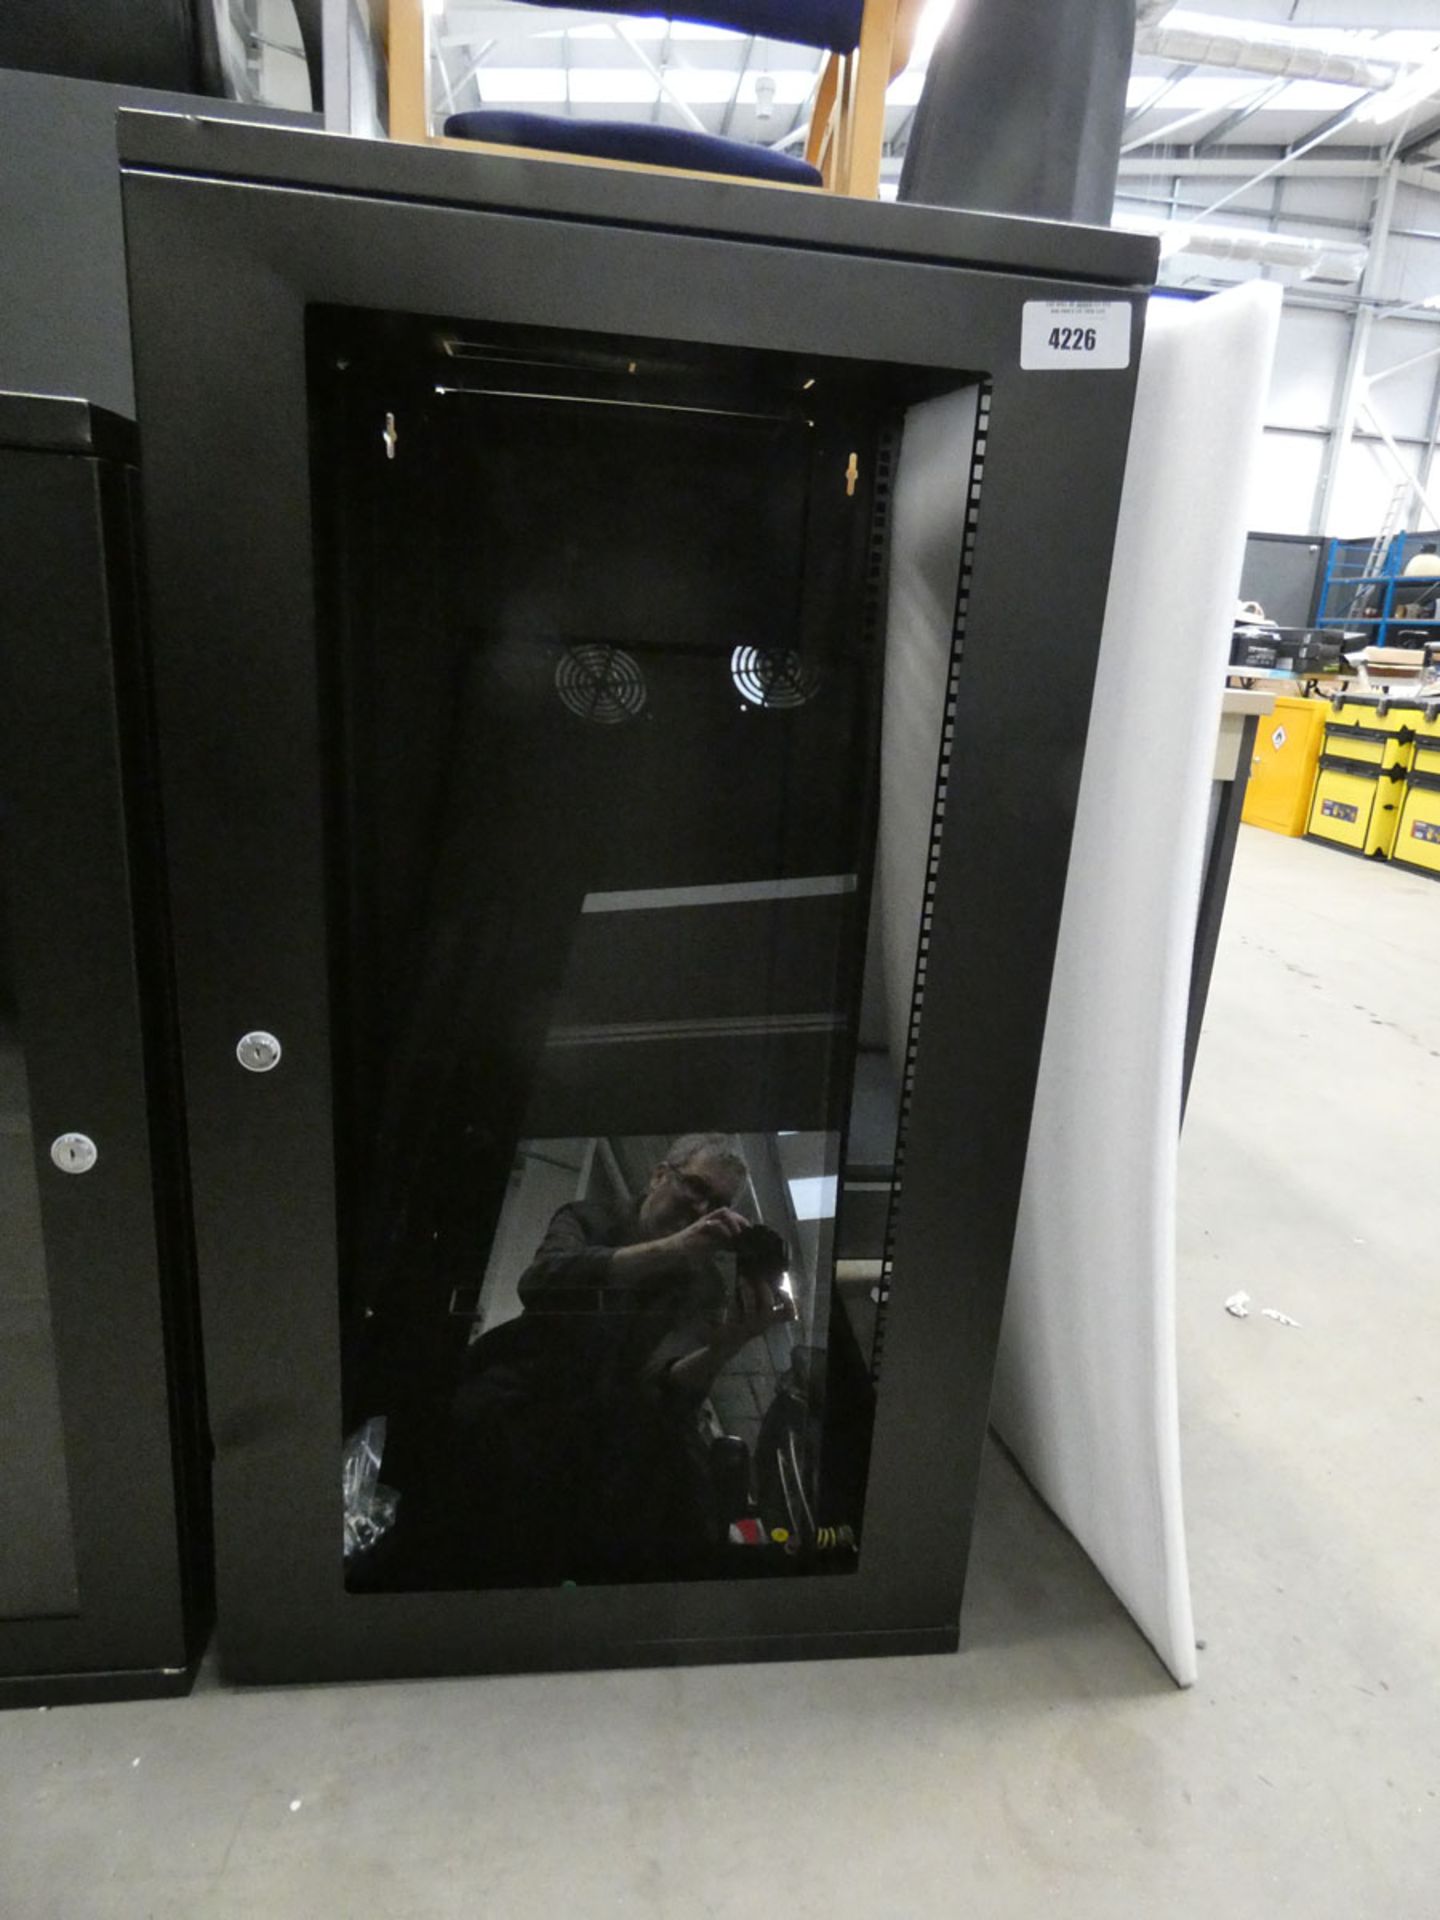 Tall black comms cabinet